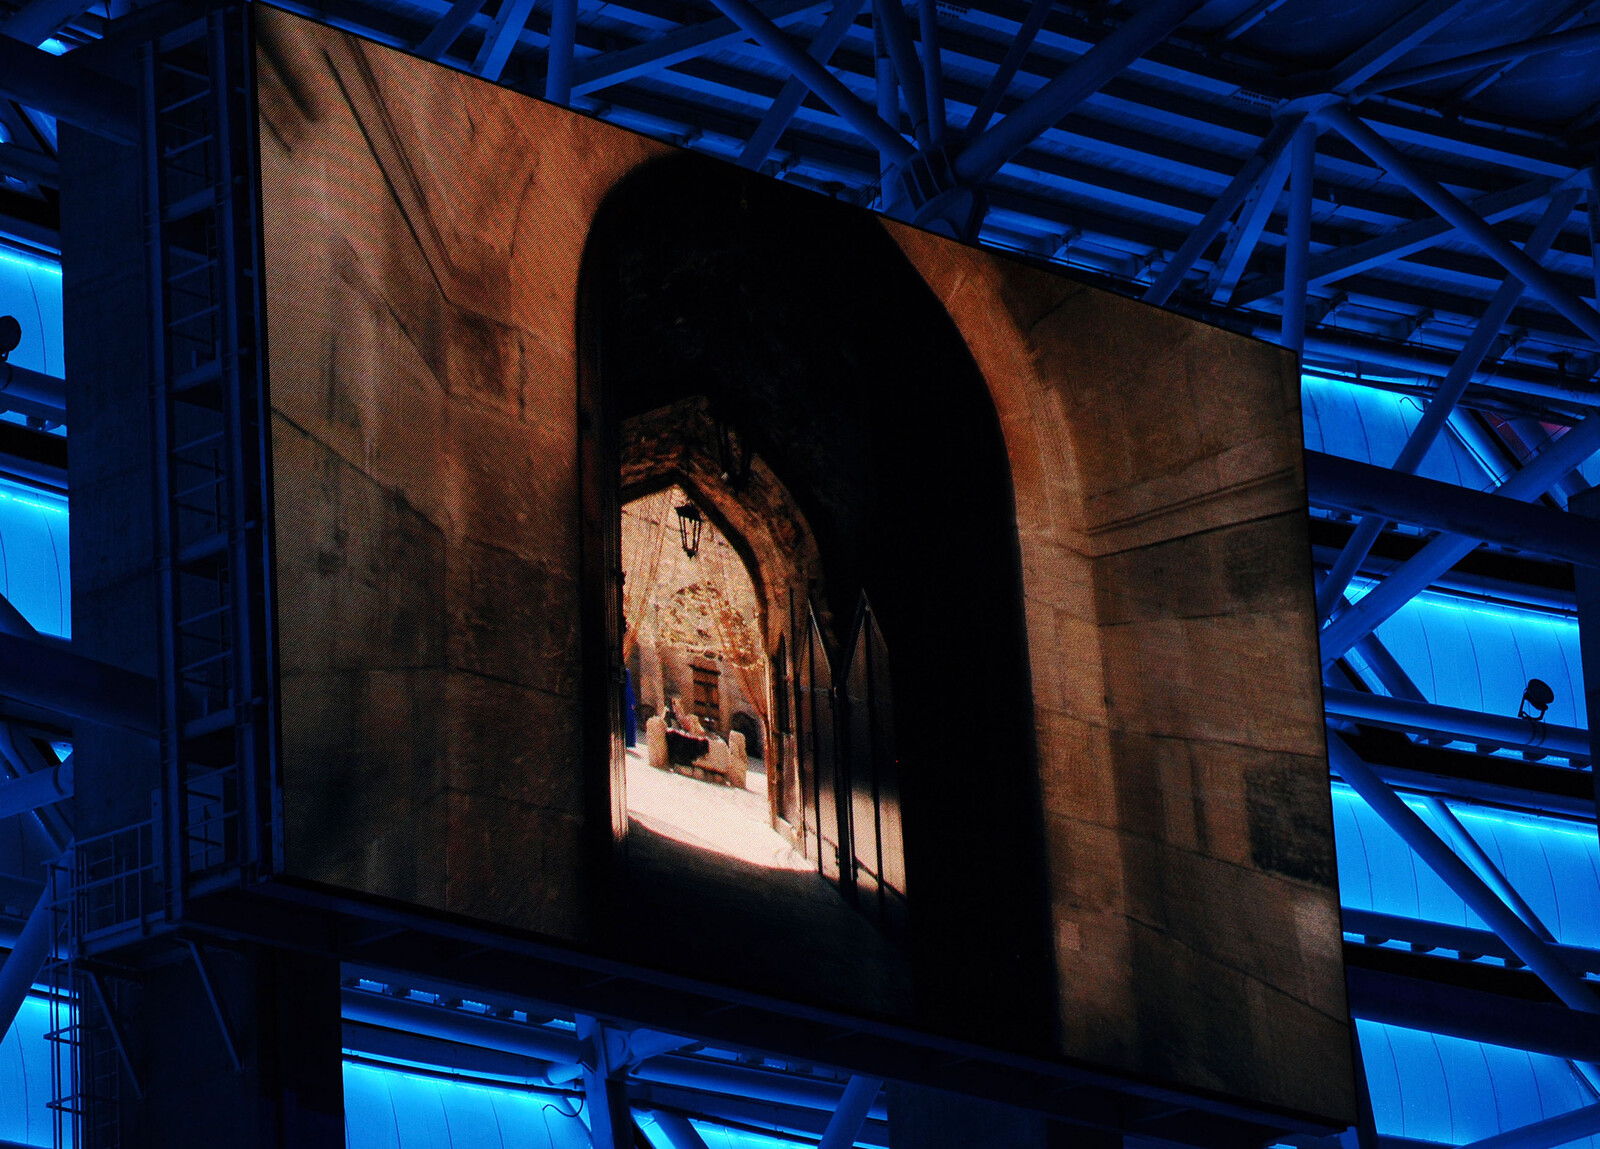 Photo of the video beeing screened in the stadium